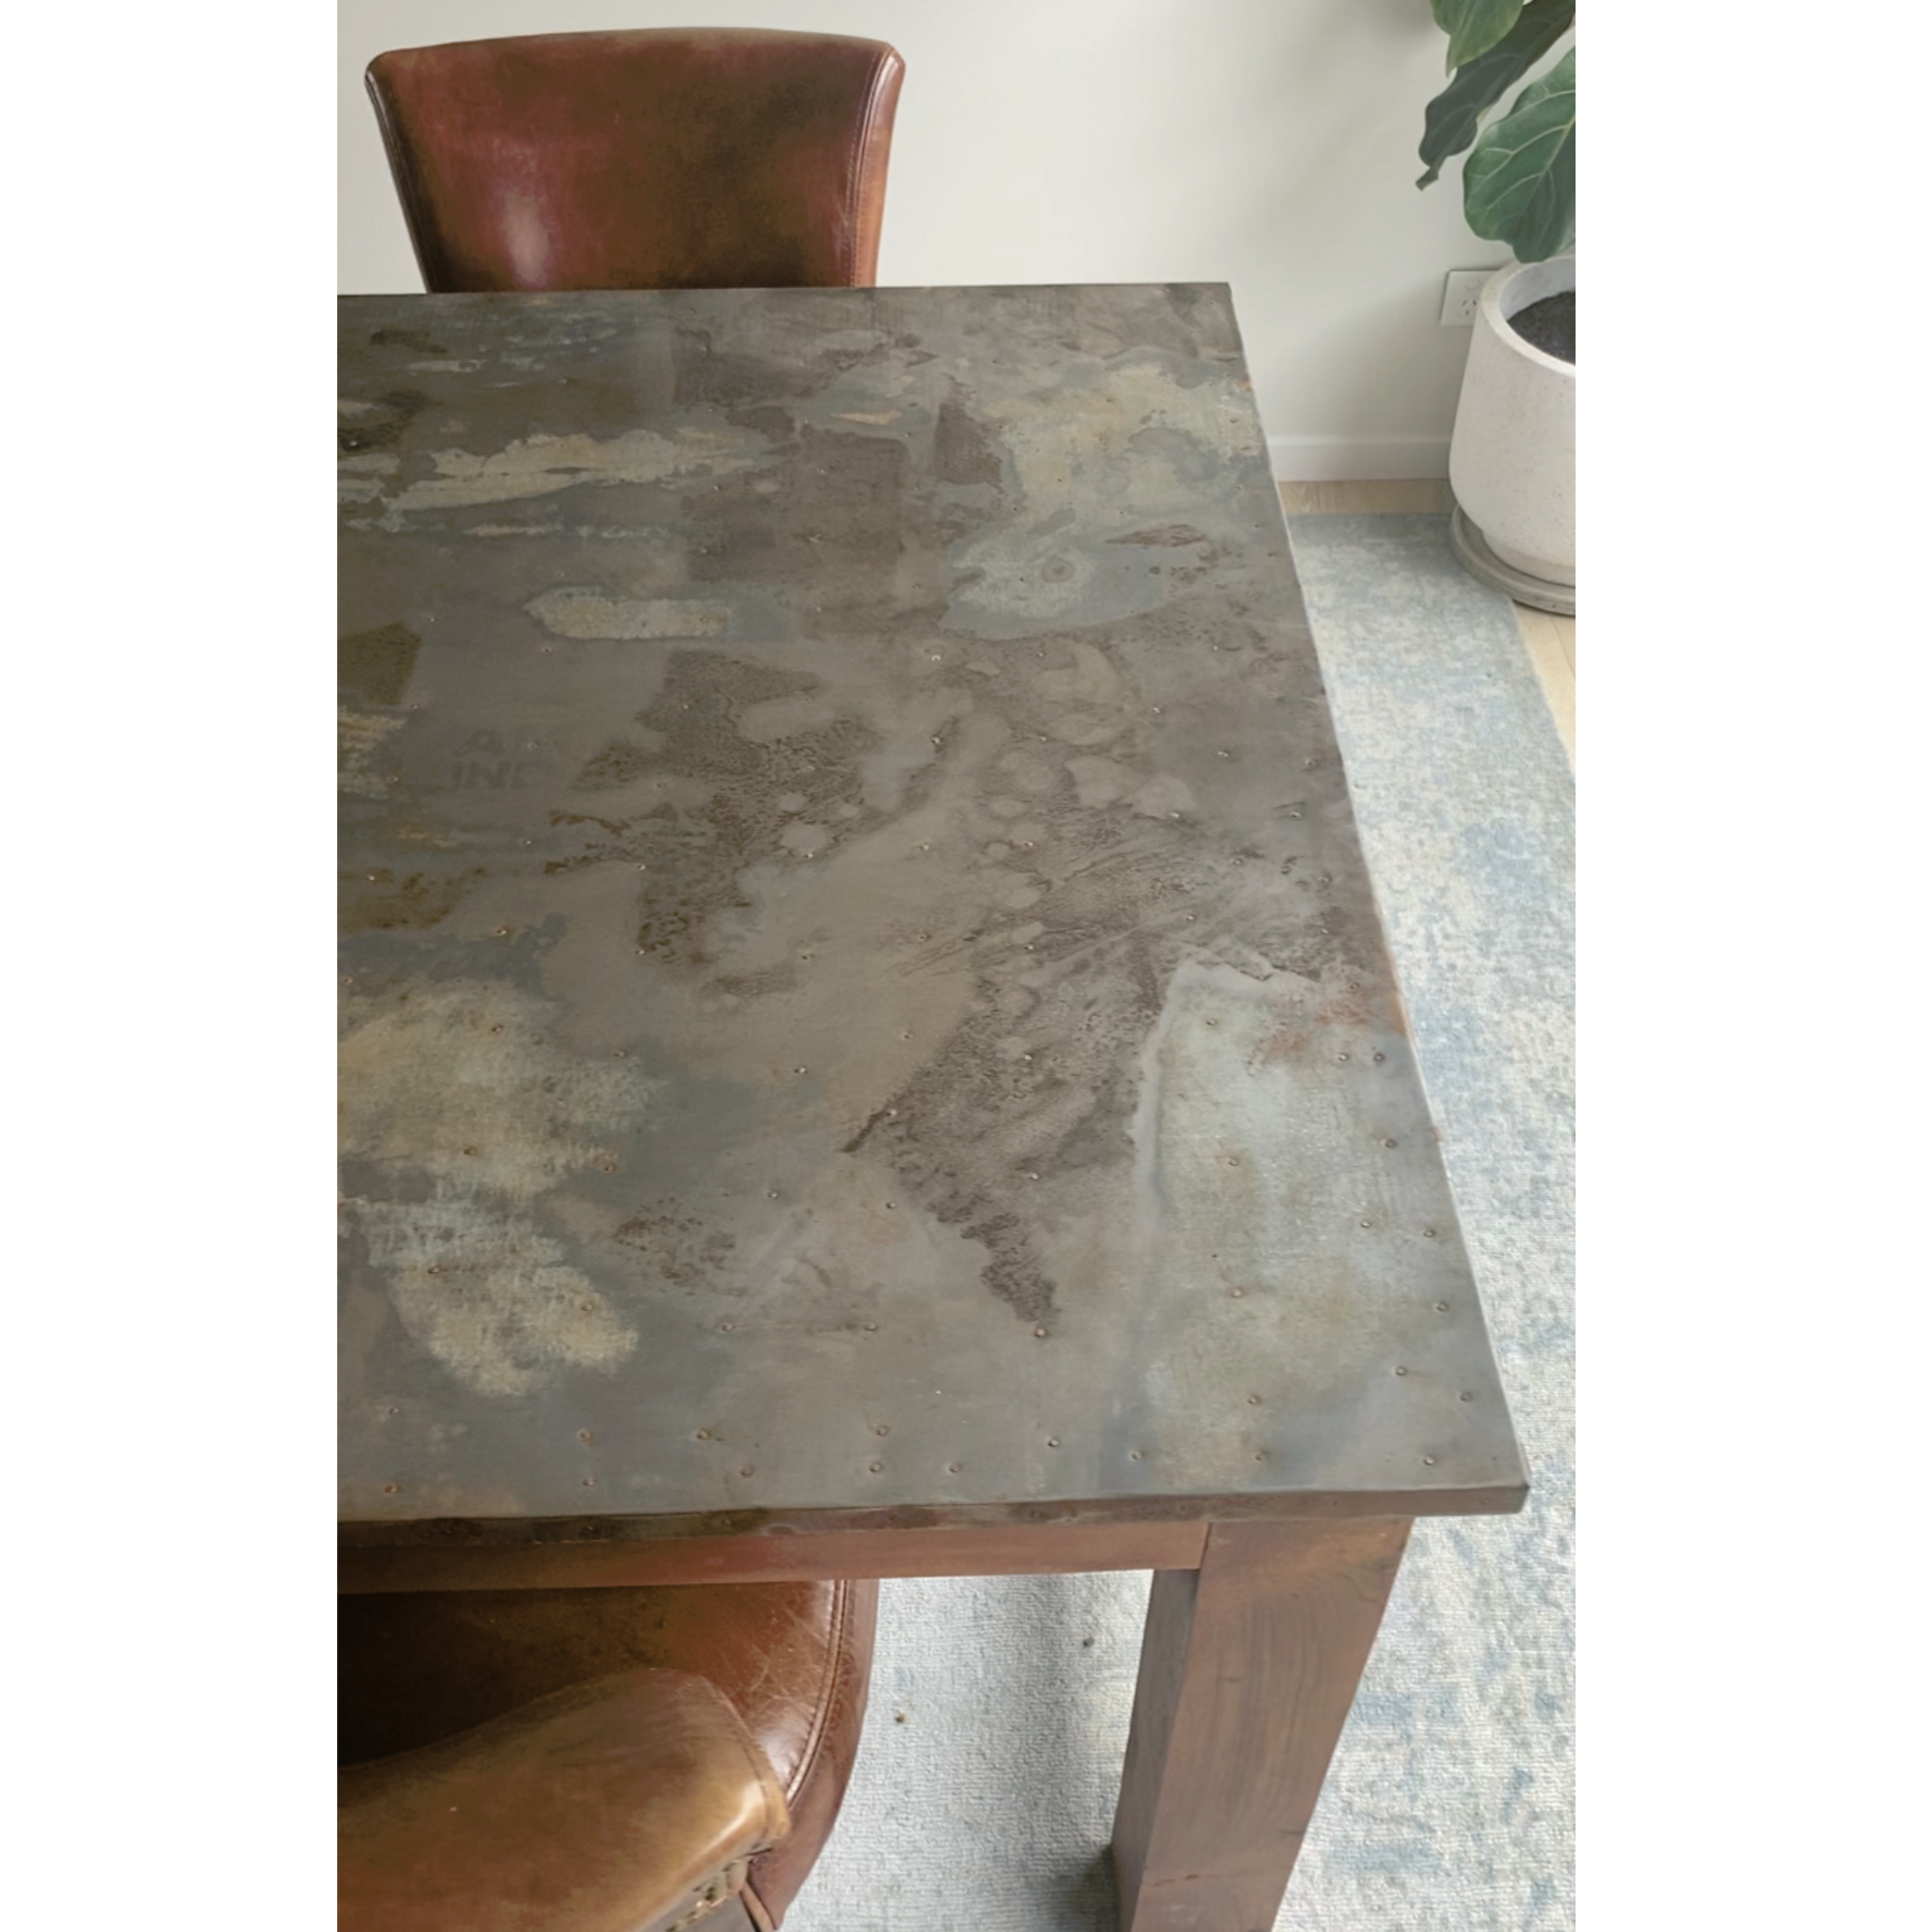 LIVERPOOL ZINC TOP DINING TABLE 240CM